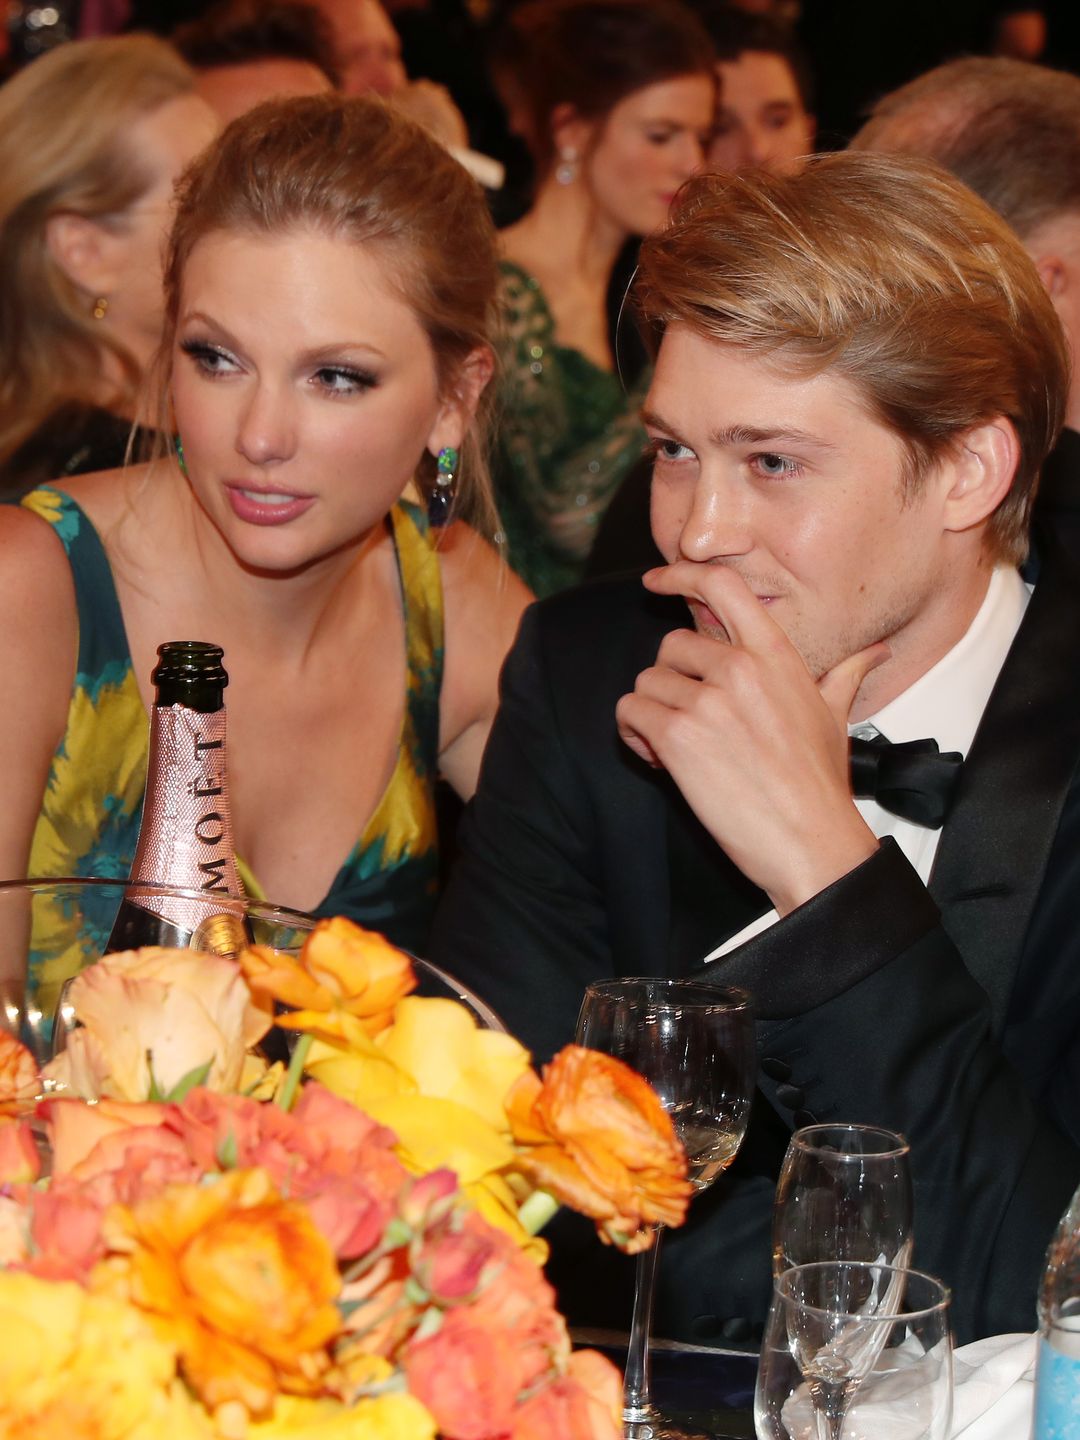 Taylor and Joe at an awards ceremony, sat looking over to the left while leaning into each other